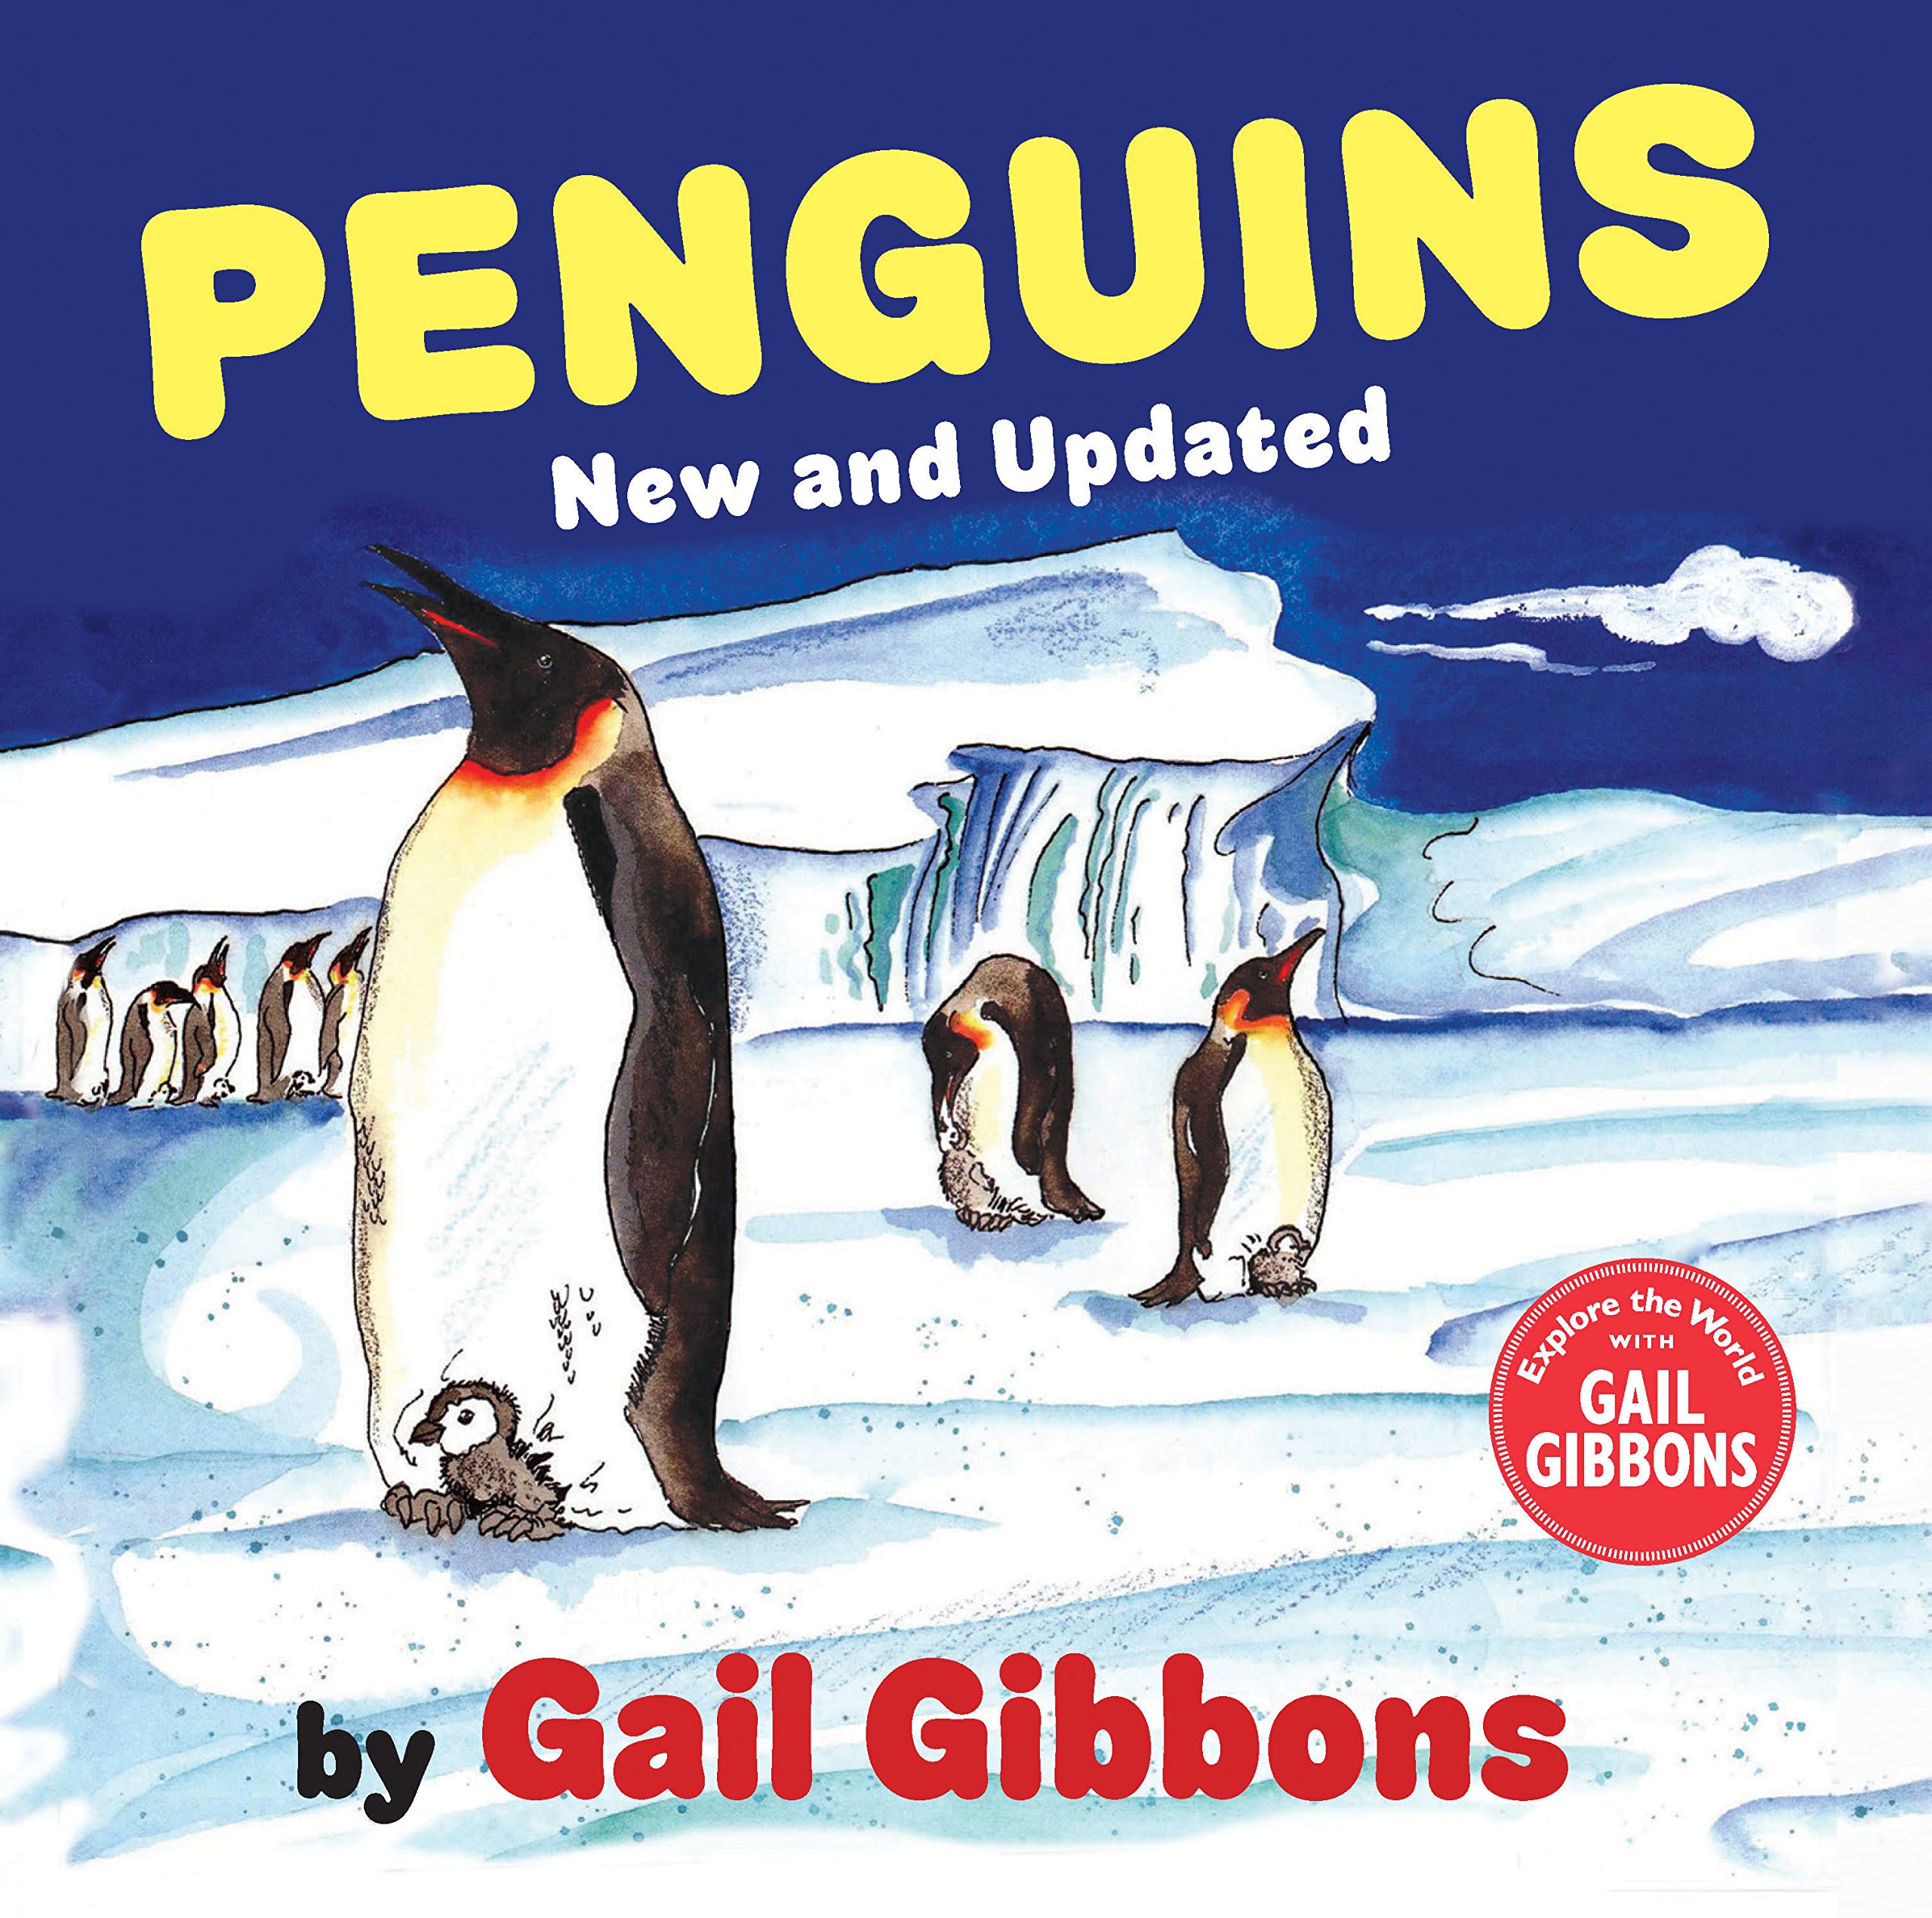 Penguins (New & Updated Edition)